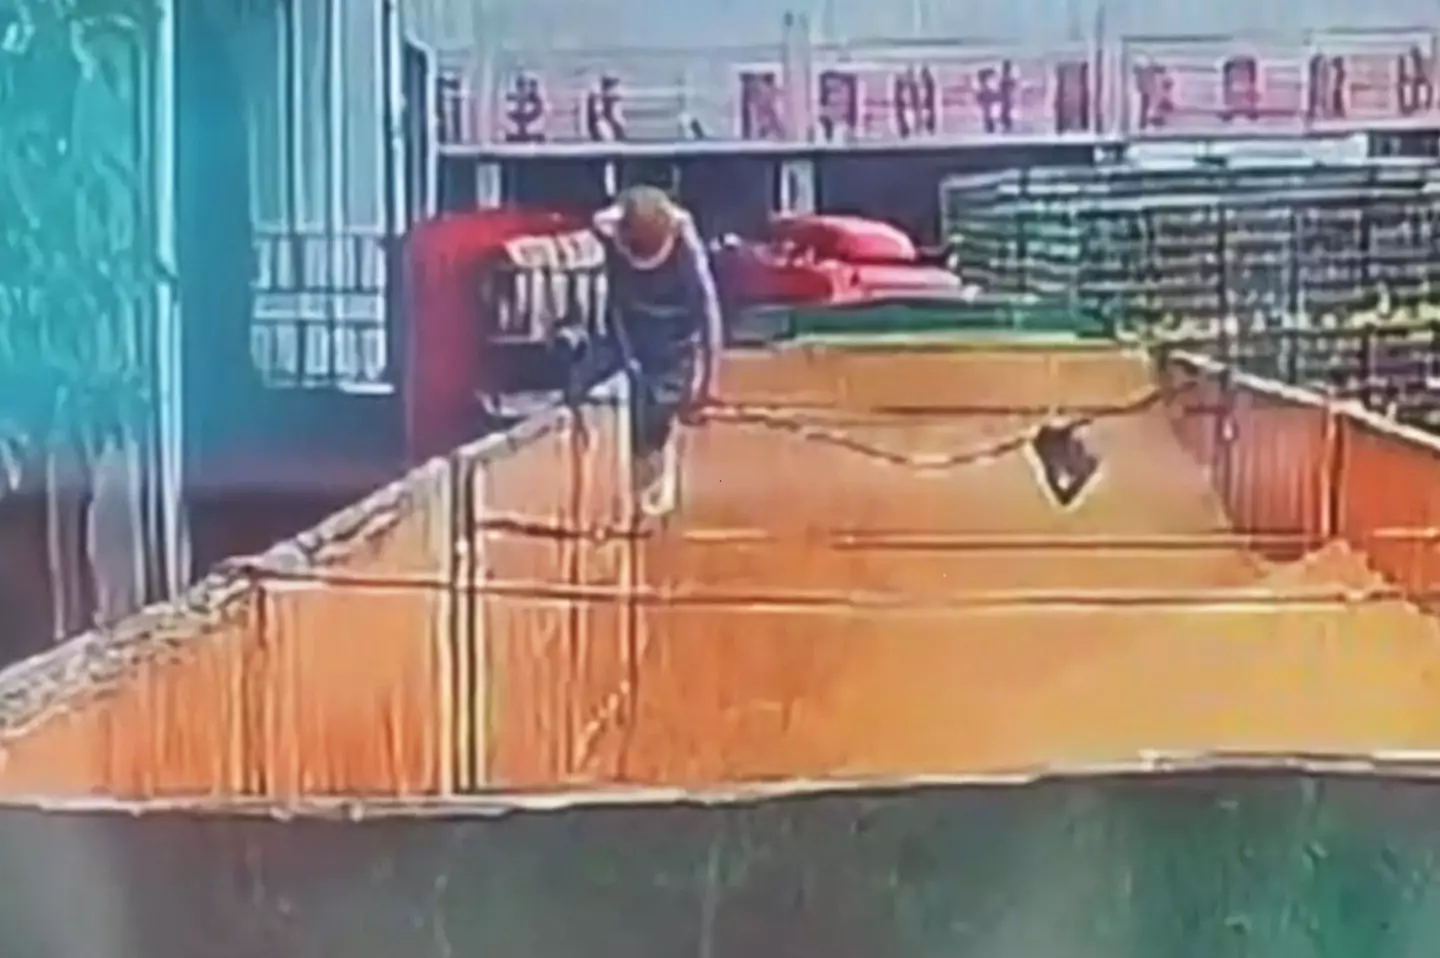 The man was caught on camera clambering into the back of a brewery delivery truck.